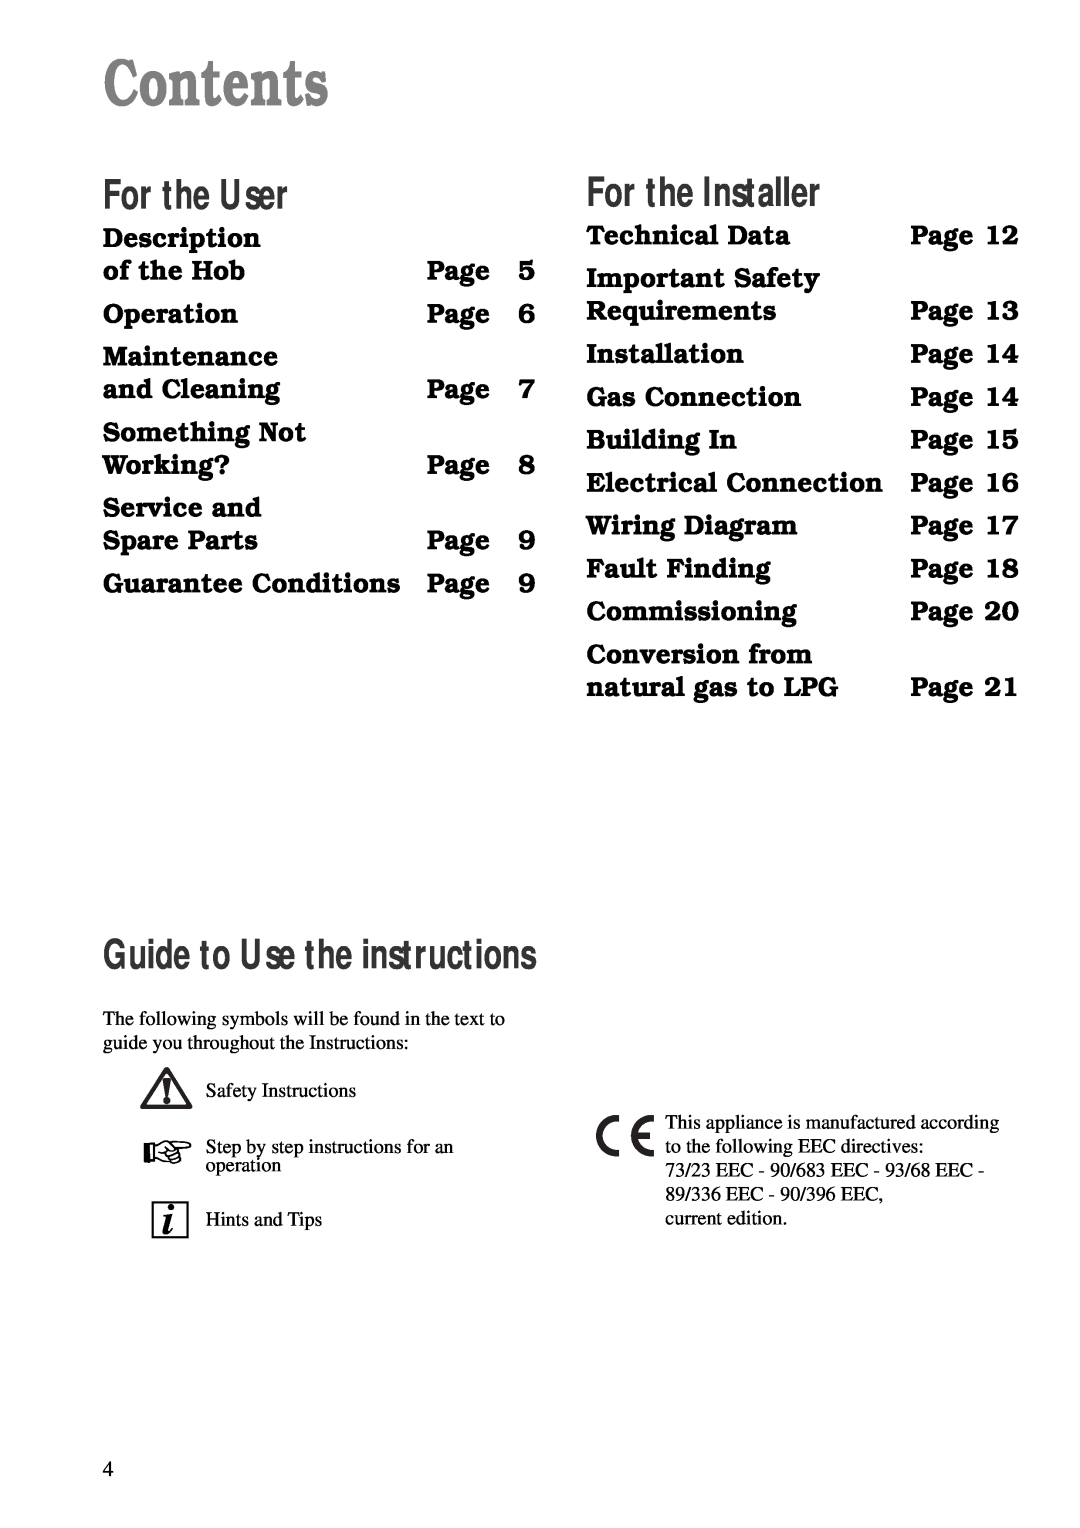 Tricity Bendix TBG 640 manual Contents, For the User, For the Installer, Guide to Use the instructions 